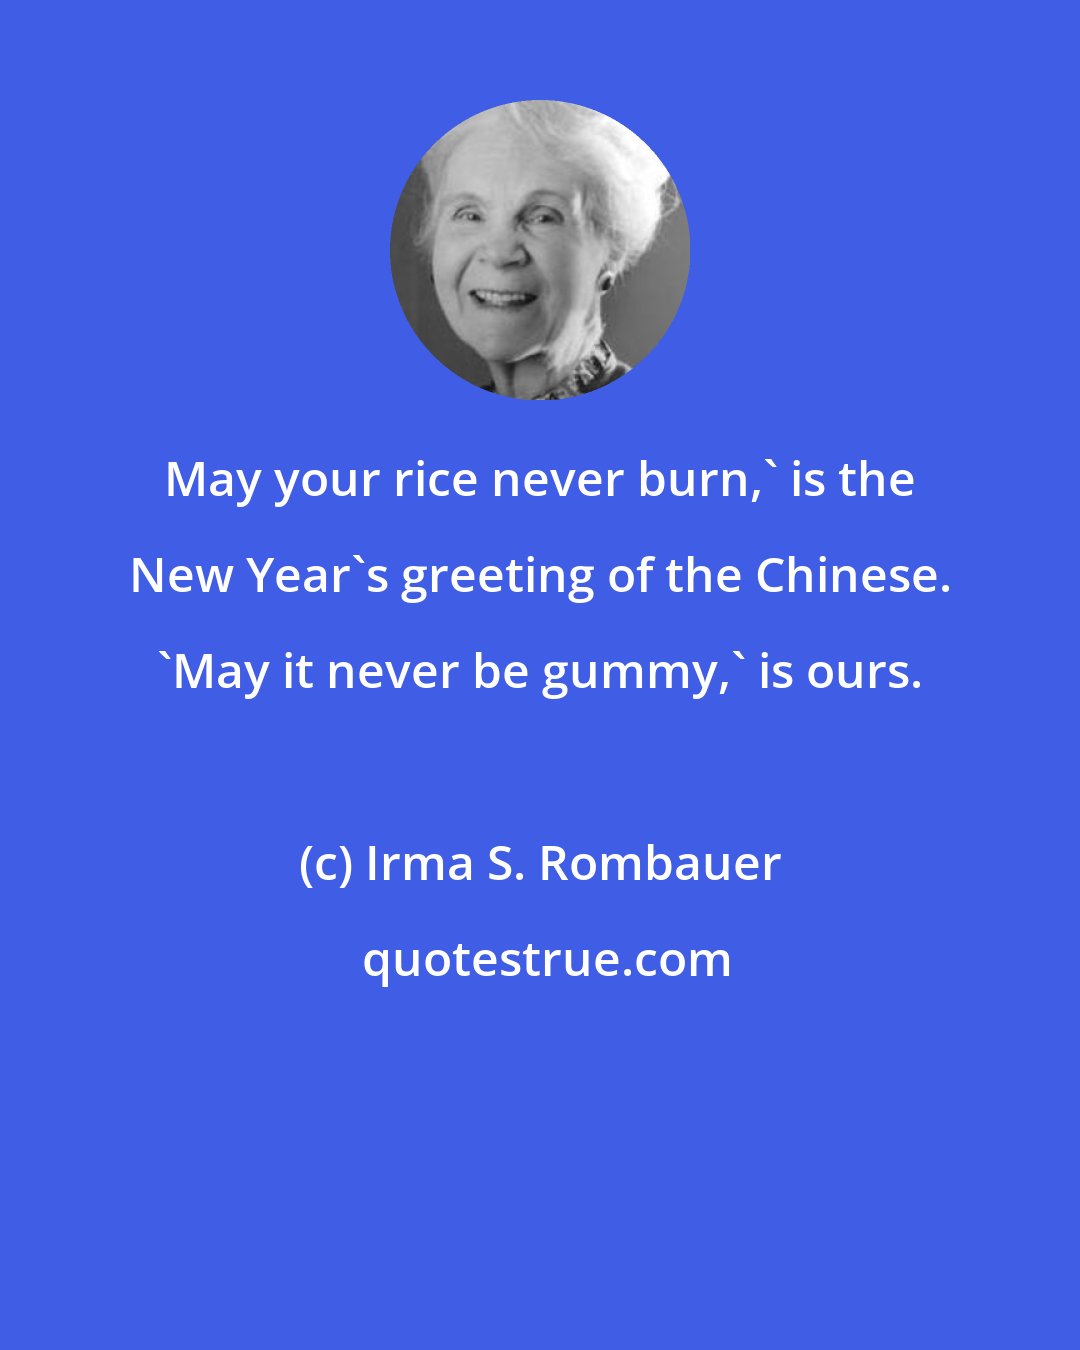 Irma S. Rombauer: May your rice never burn,' is the New Year's greeting of the Chinese. 'May it never be gummy,' is ours.